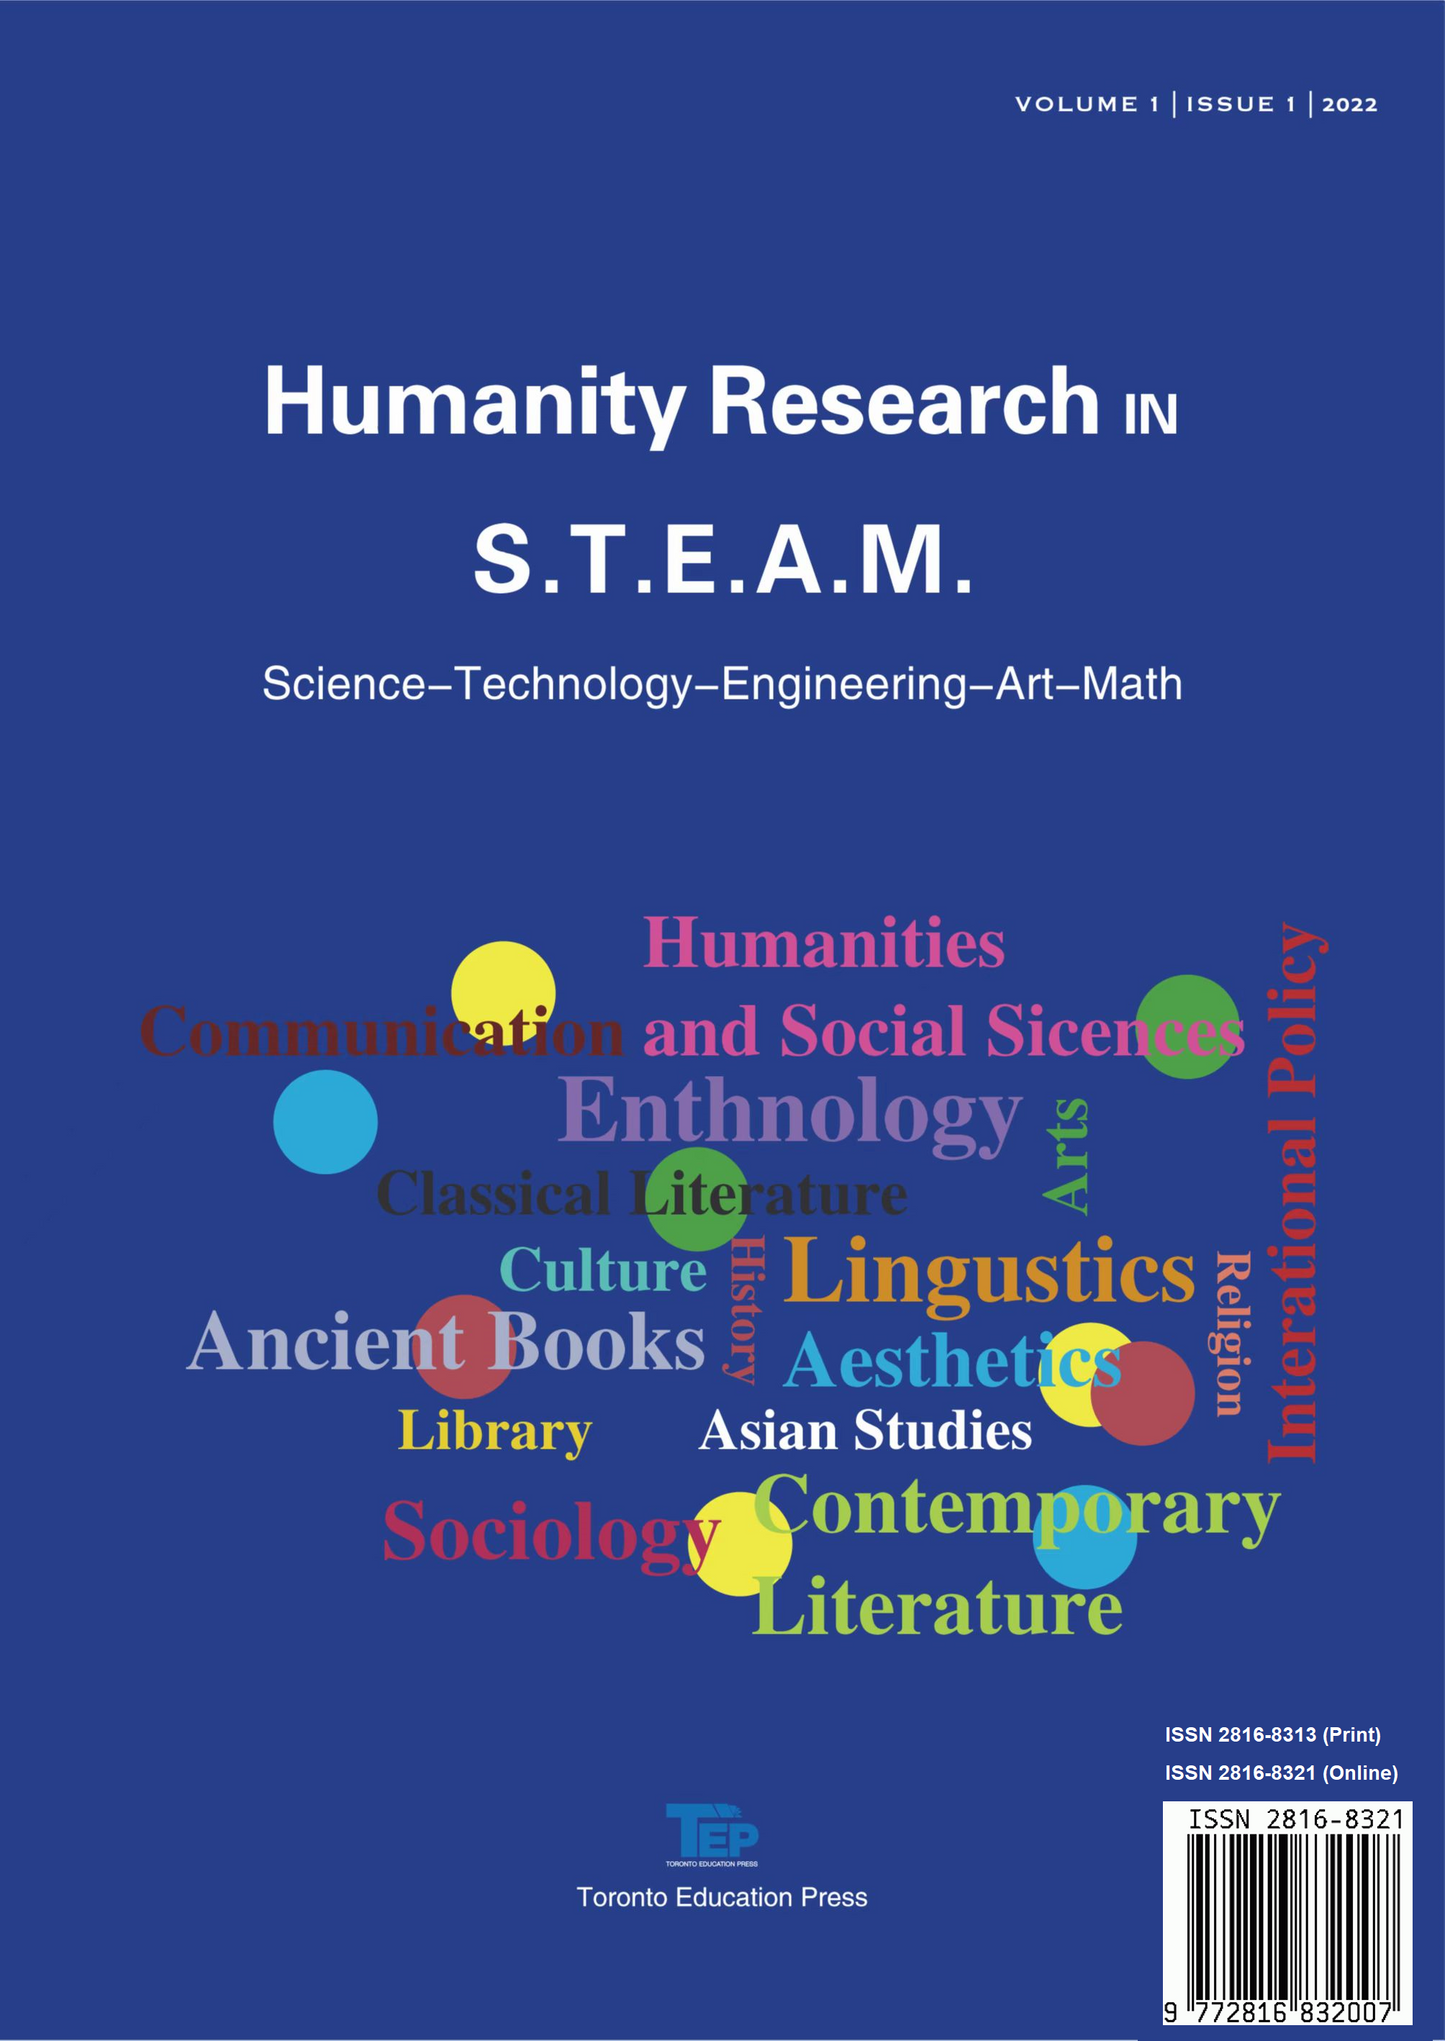 Humanity Research In S.T.E.A.M.- Ebook